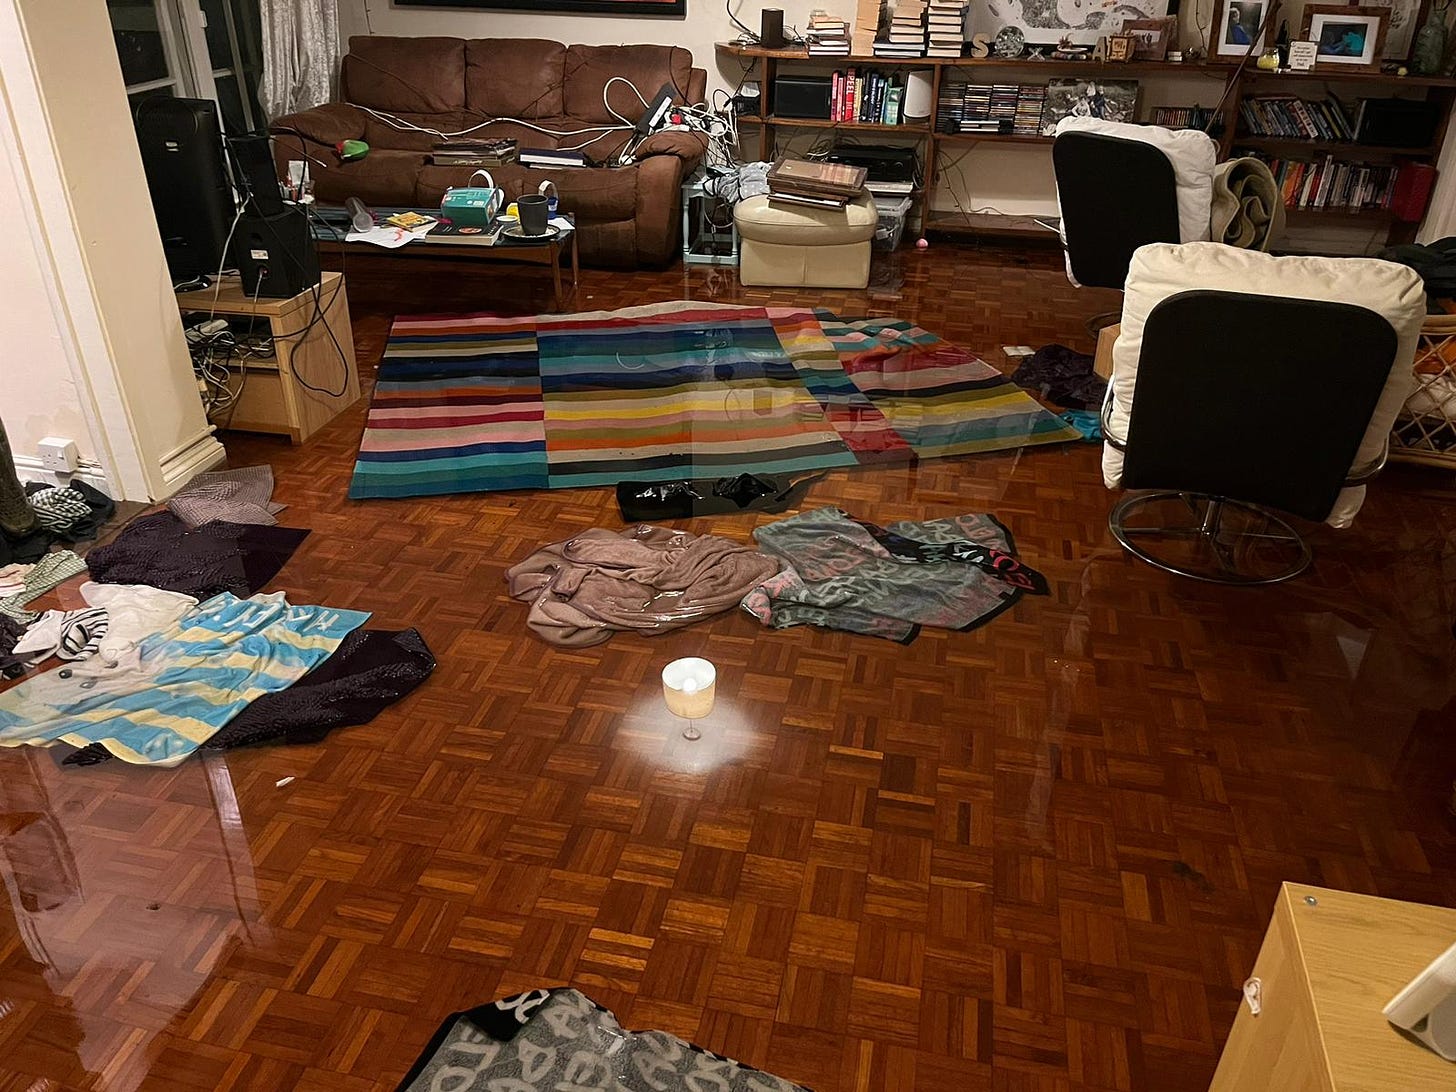 Spen's living room under 2 inches of water, towels and mats floating by